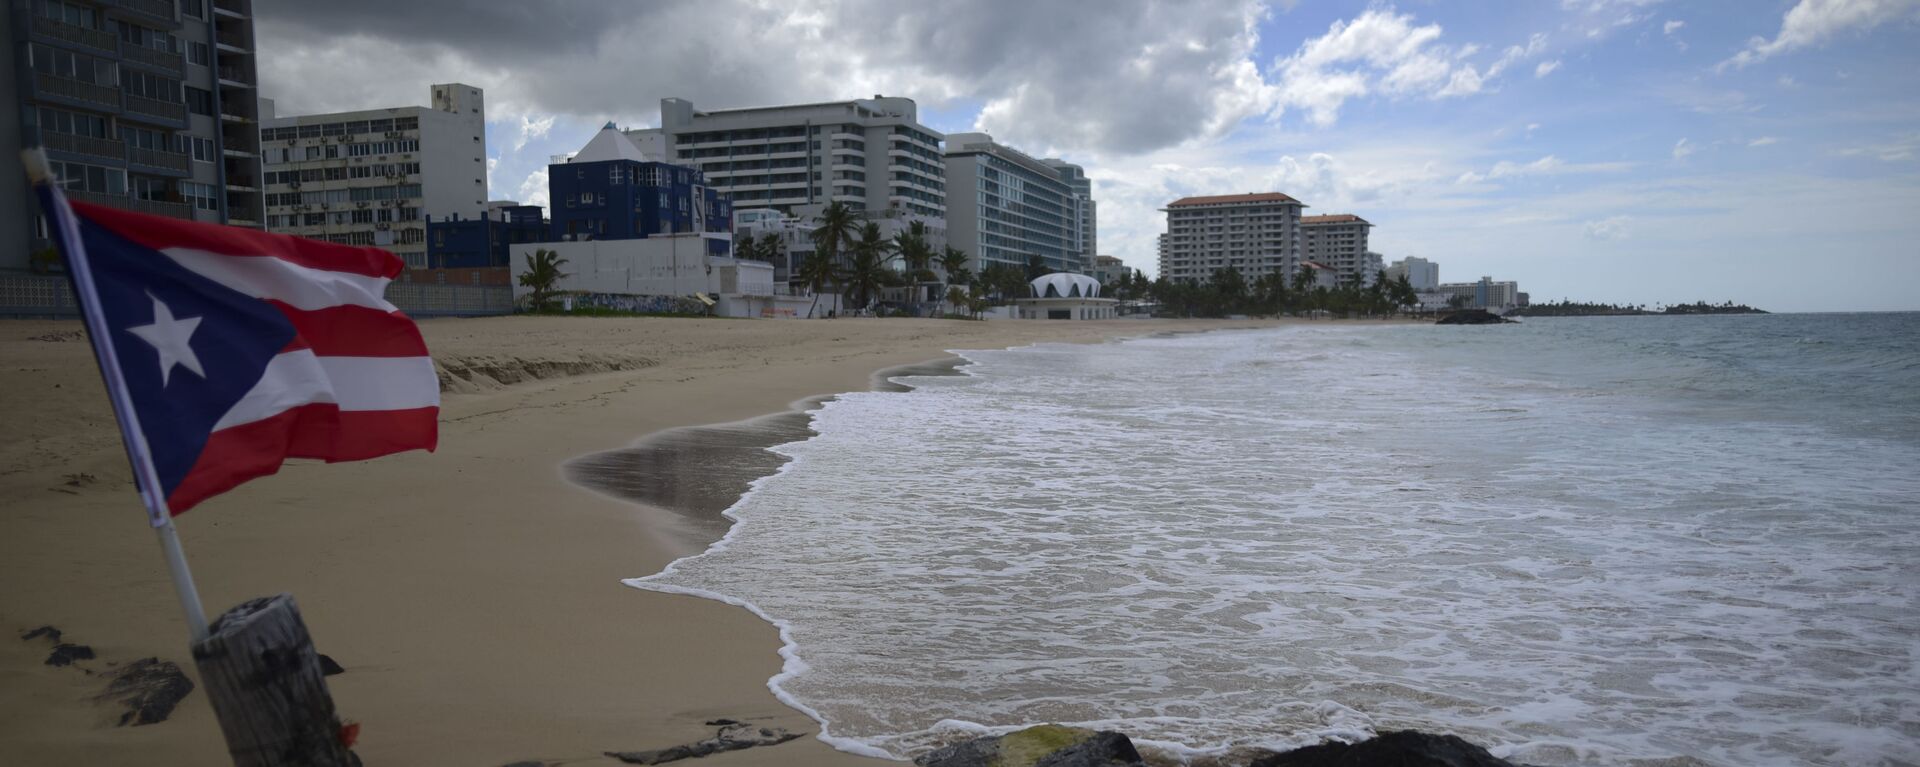 A Puerto Rican flag flies on an empty beach at Ocean Park, in San Juan, Puerto Rico, Thursday, May 21, 2020. Puerto Rico is cautiously reopening beaches, restaurants, churches, malls, and hair salons under strict conditions as the U.S. territory emerges from a two-month lockdown despite dozens of new coronavirus cases reported daily.  - Sputnik International, 1920, 03.03.2021